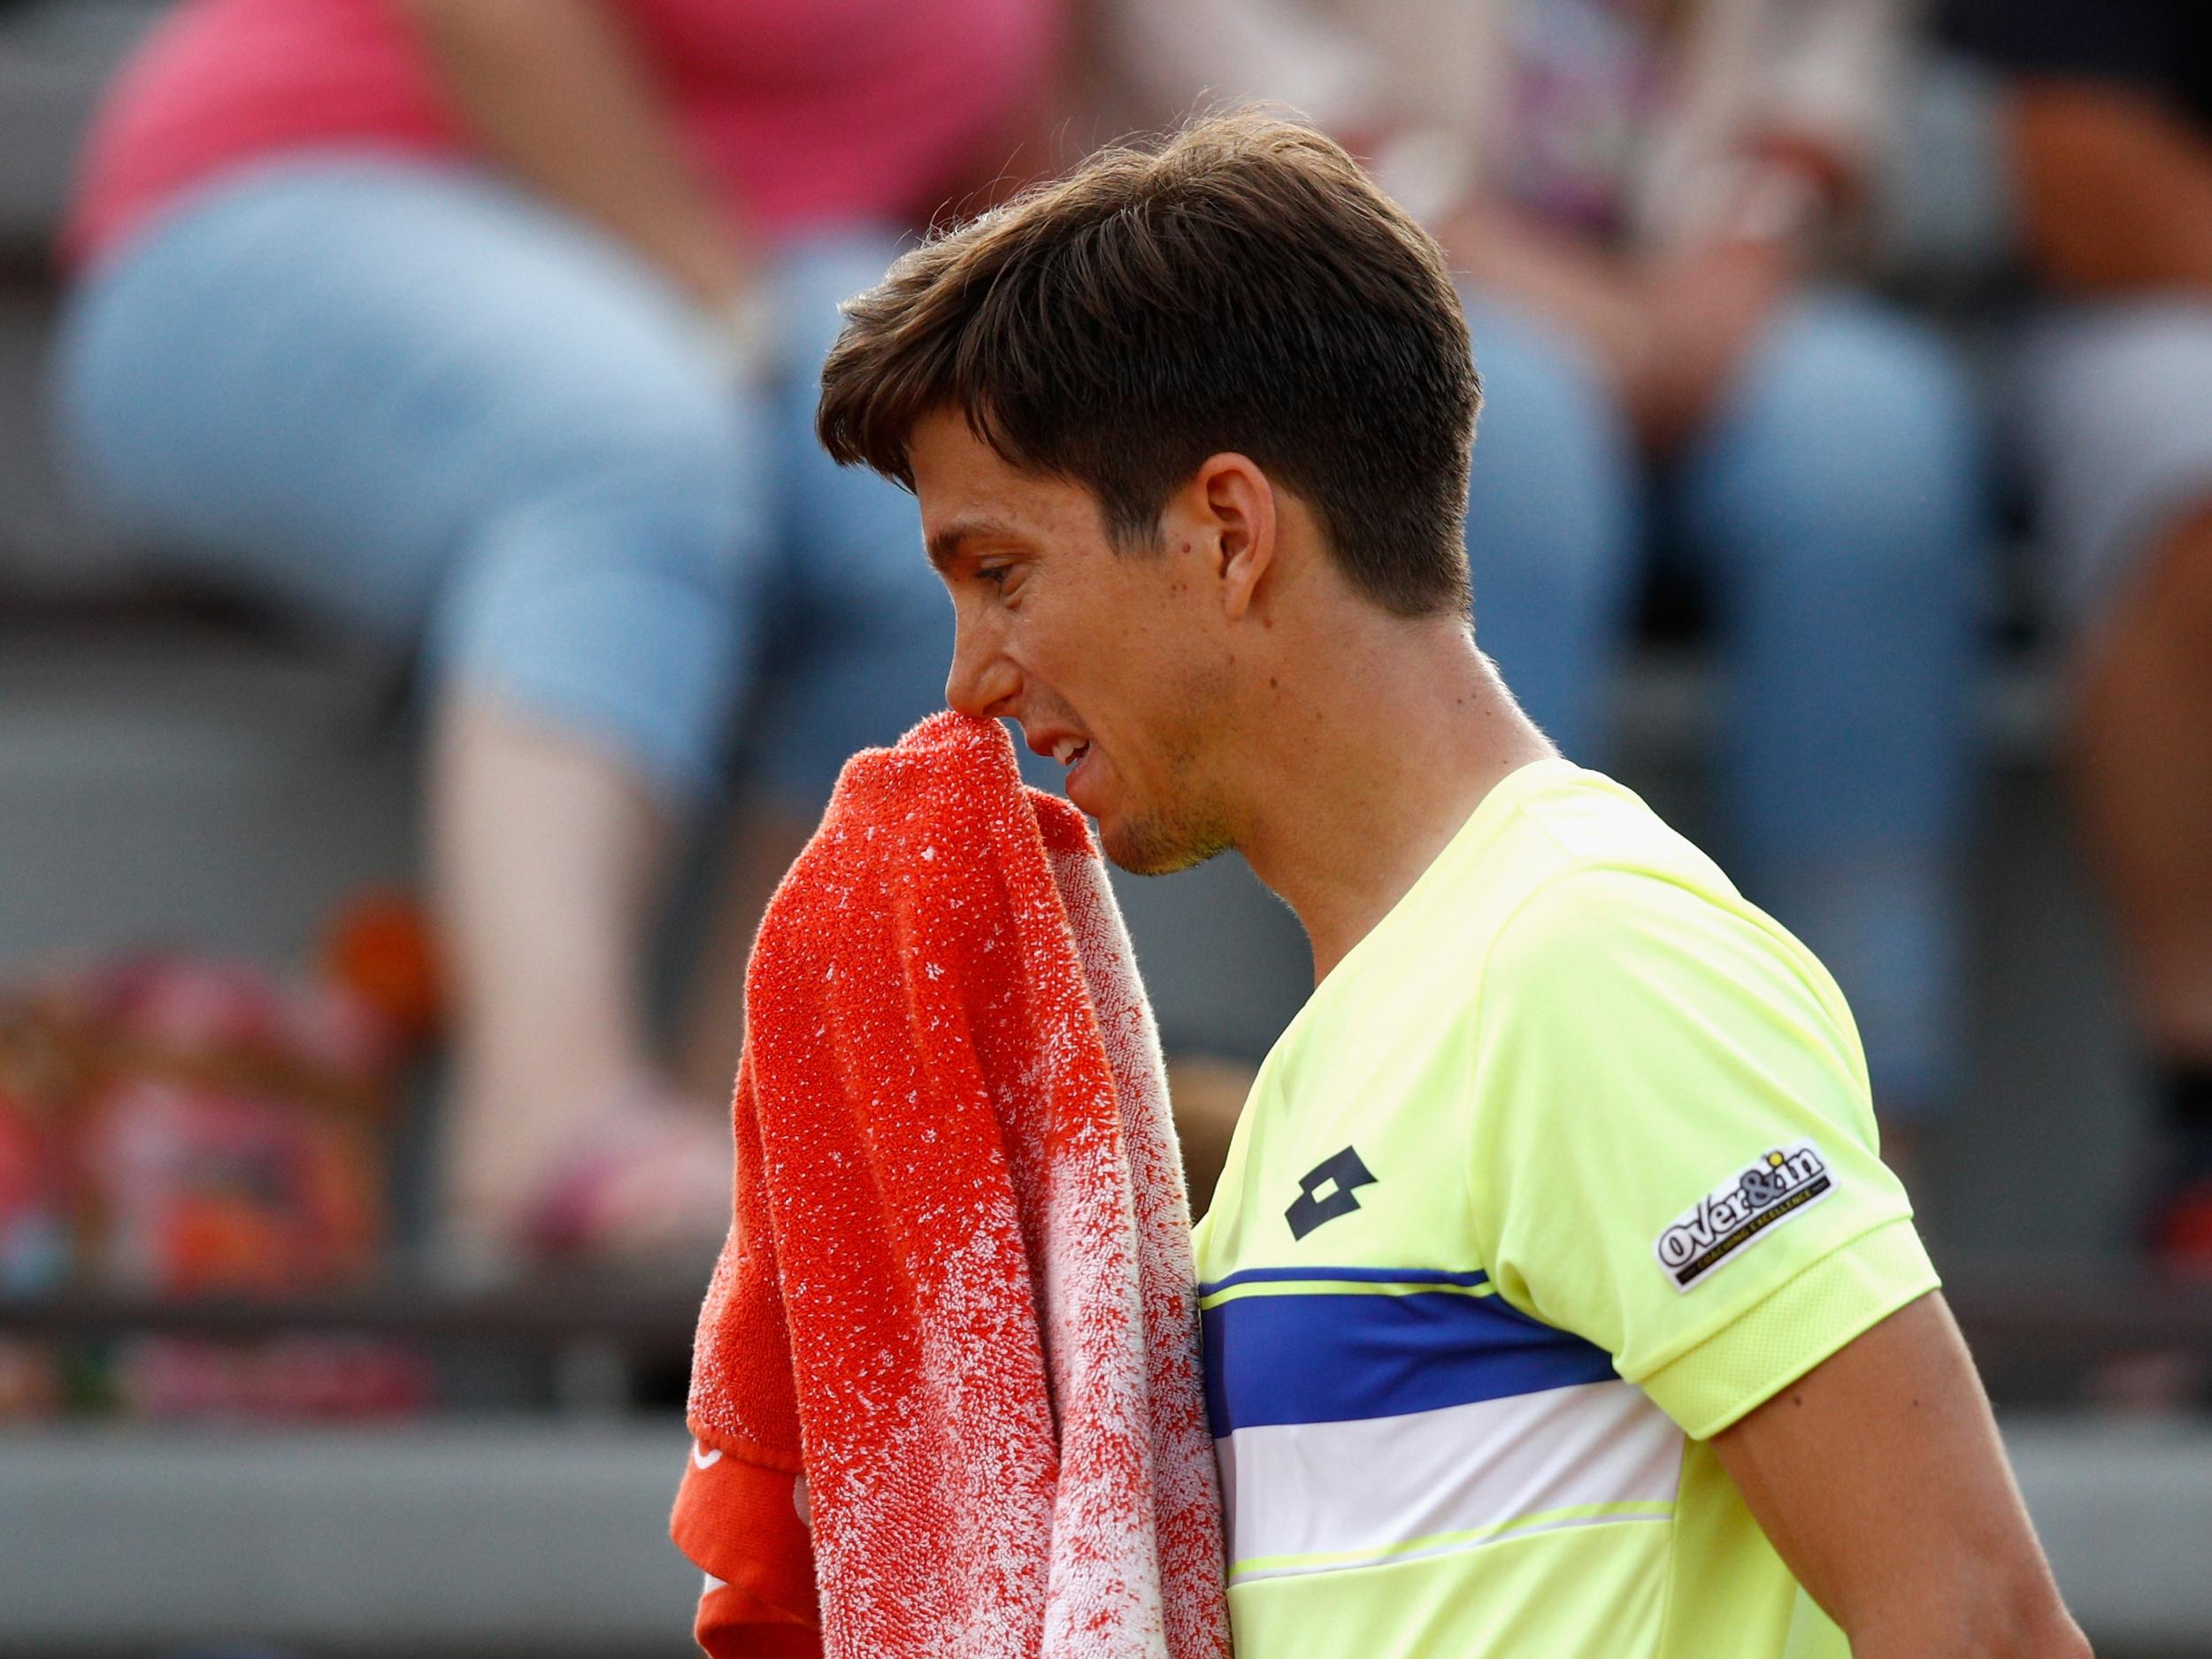 Bedene squeezed his way into the tournament